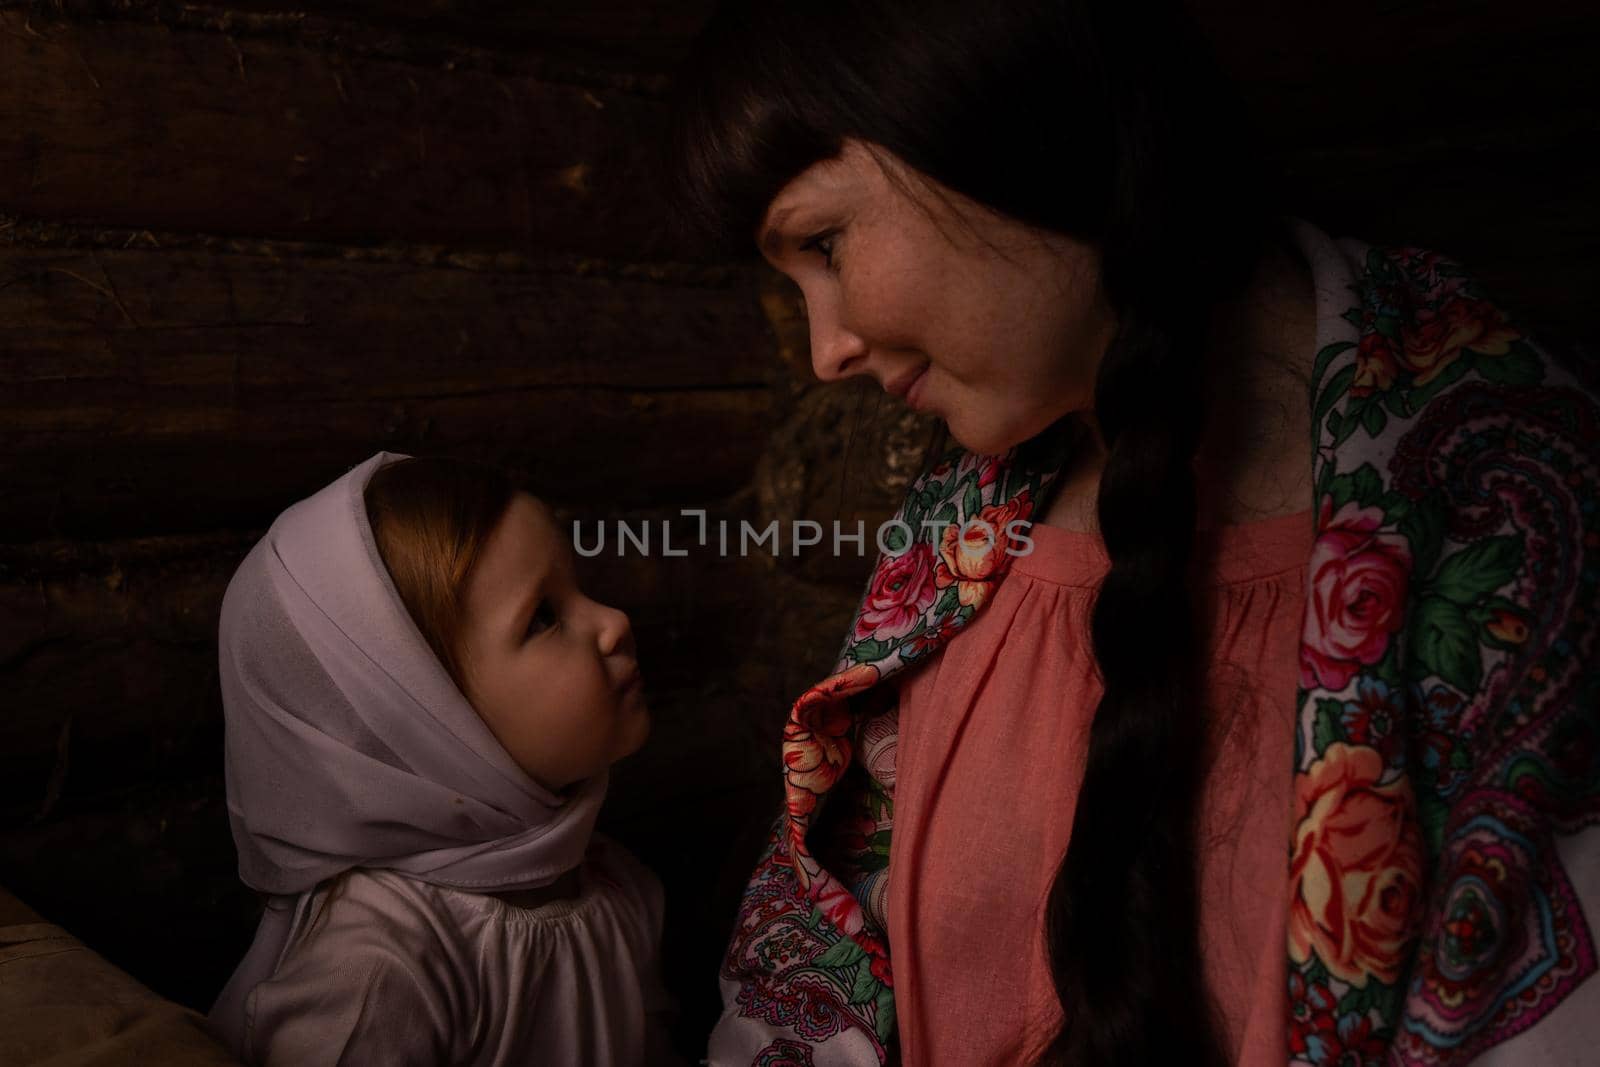 a woman and a baby in Russian folk costumes in a bast hut look at each other. Mom smiles at her beloved daughter. The girl looks at her mother enchanted